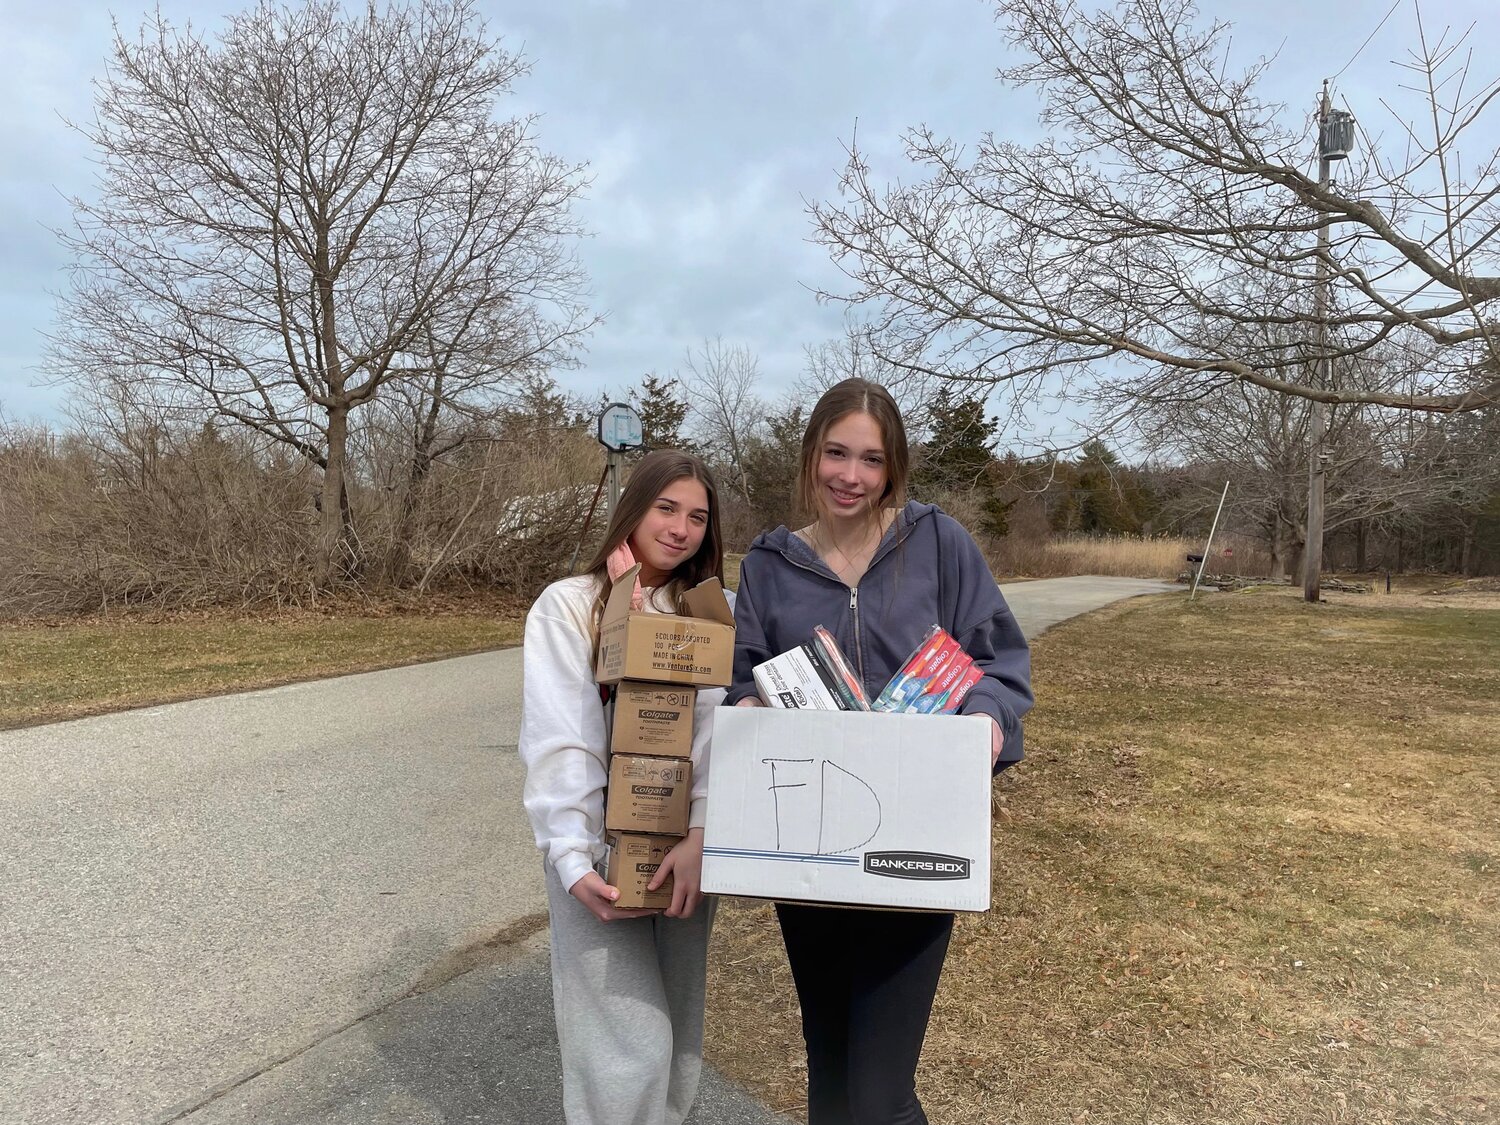 Ava Ricci and Sophie Zalosh, sophomores at Manchester Essex Regional high school fundraising for children and teenagers in the foster care system through Comfort Cases, a nationwide organization.